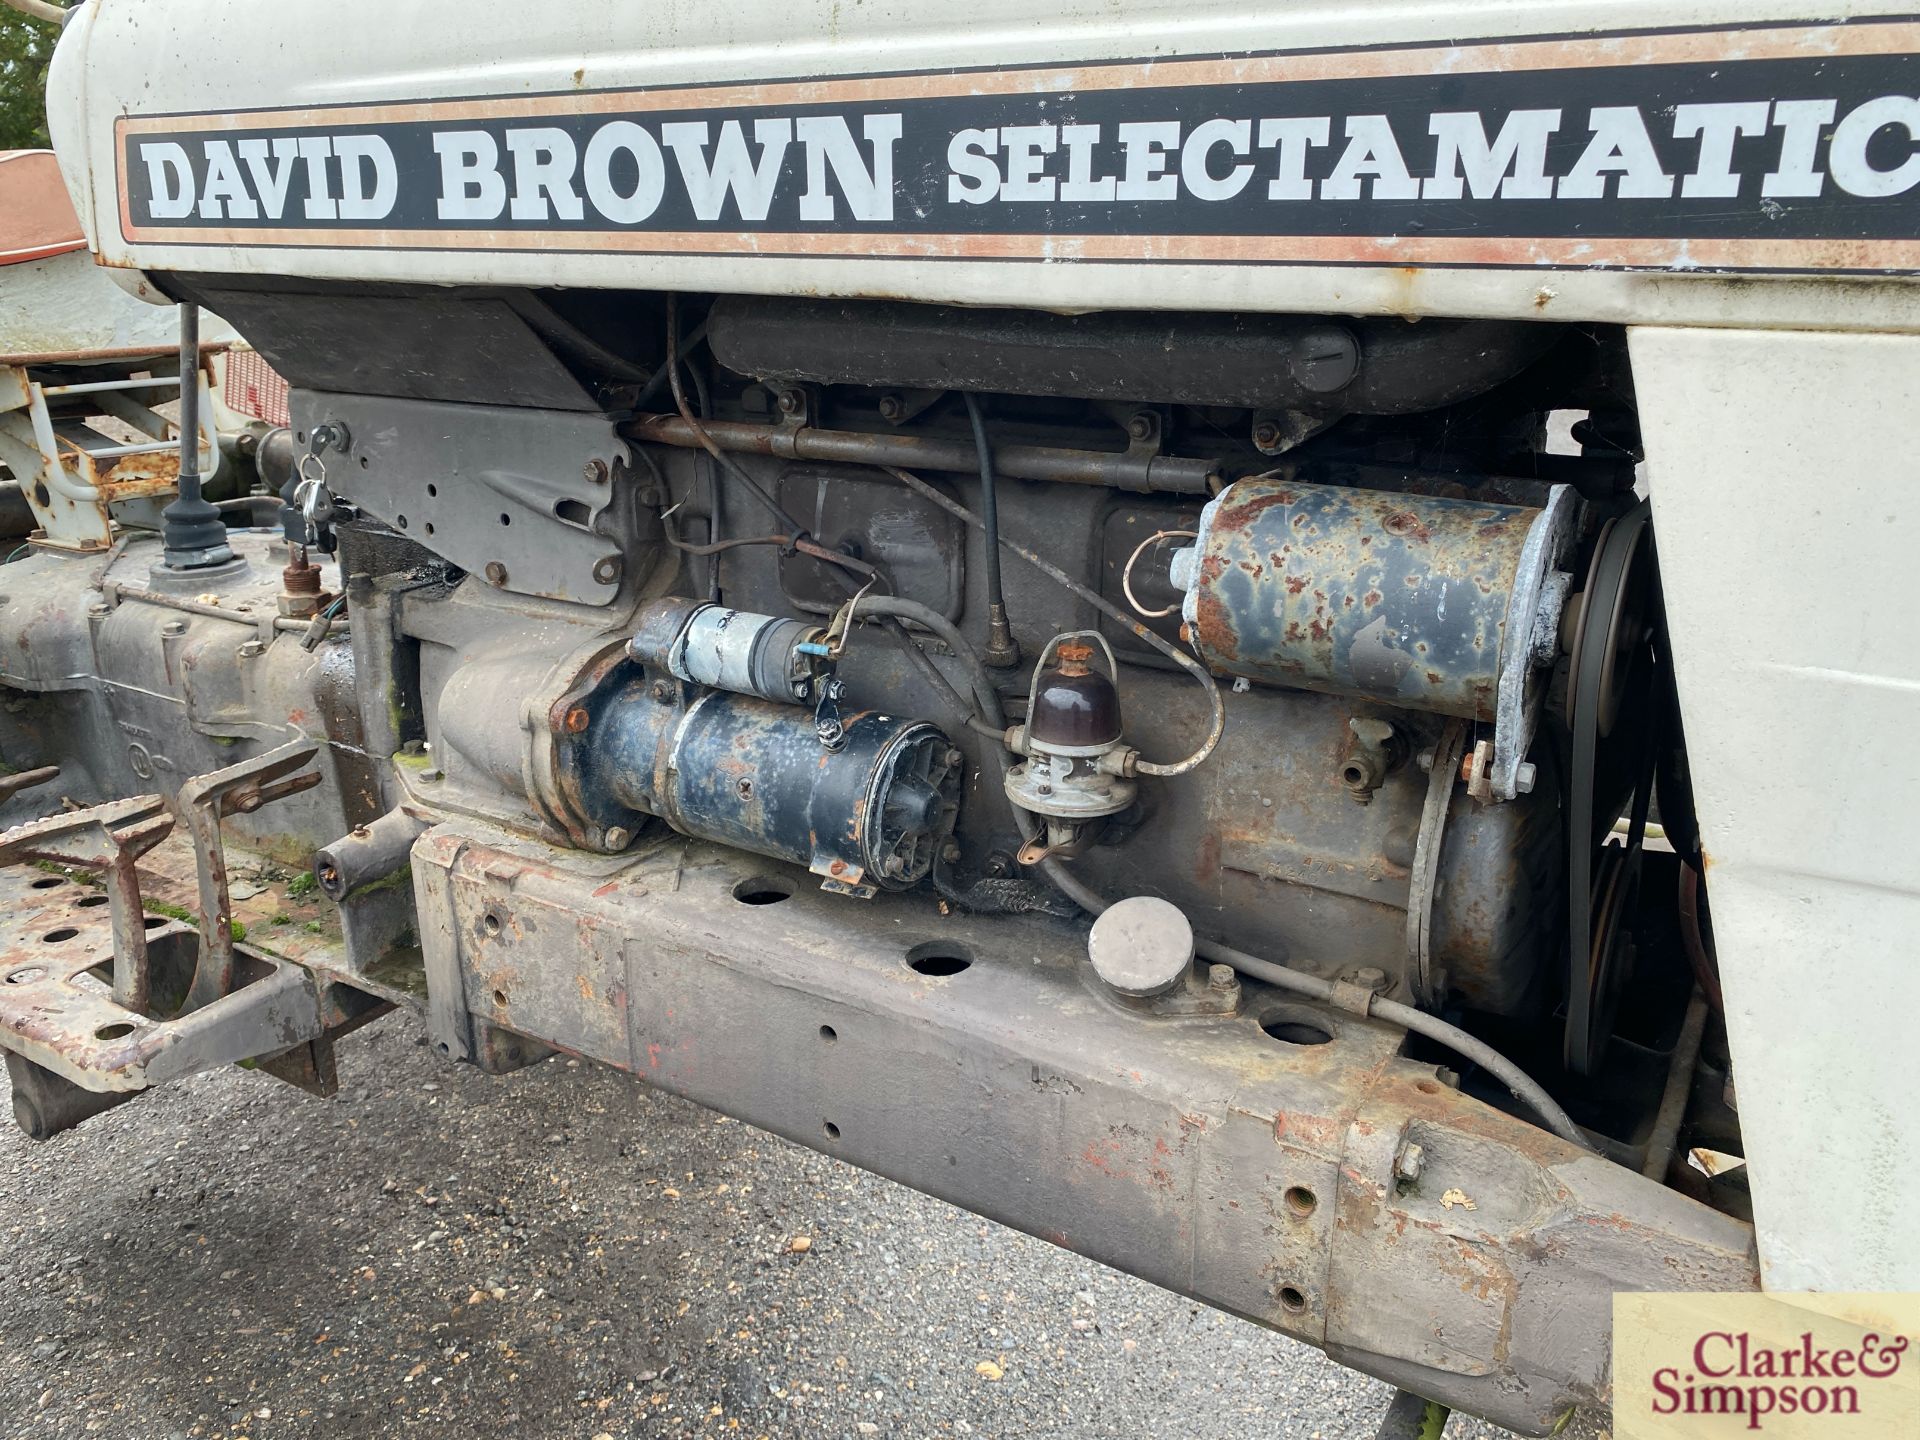 David Brown 990 Selectamatic 2WD tractor. Registration DUE 781D (no paperwork). Serial number 990A/ - Image 13 of 31